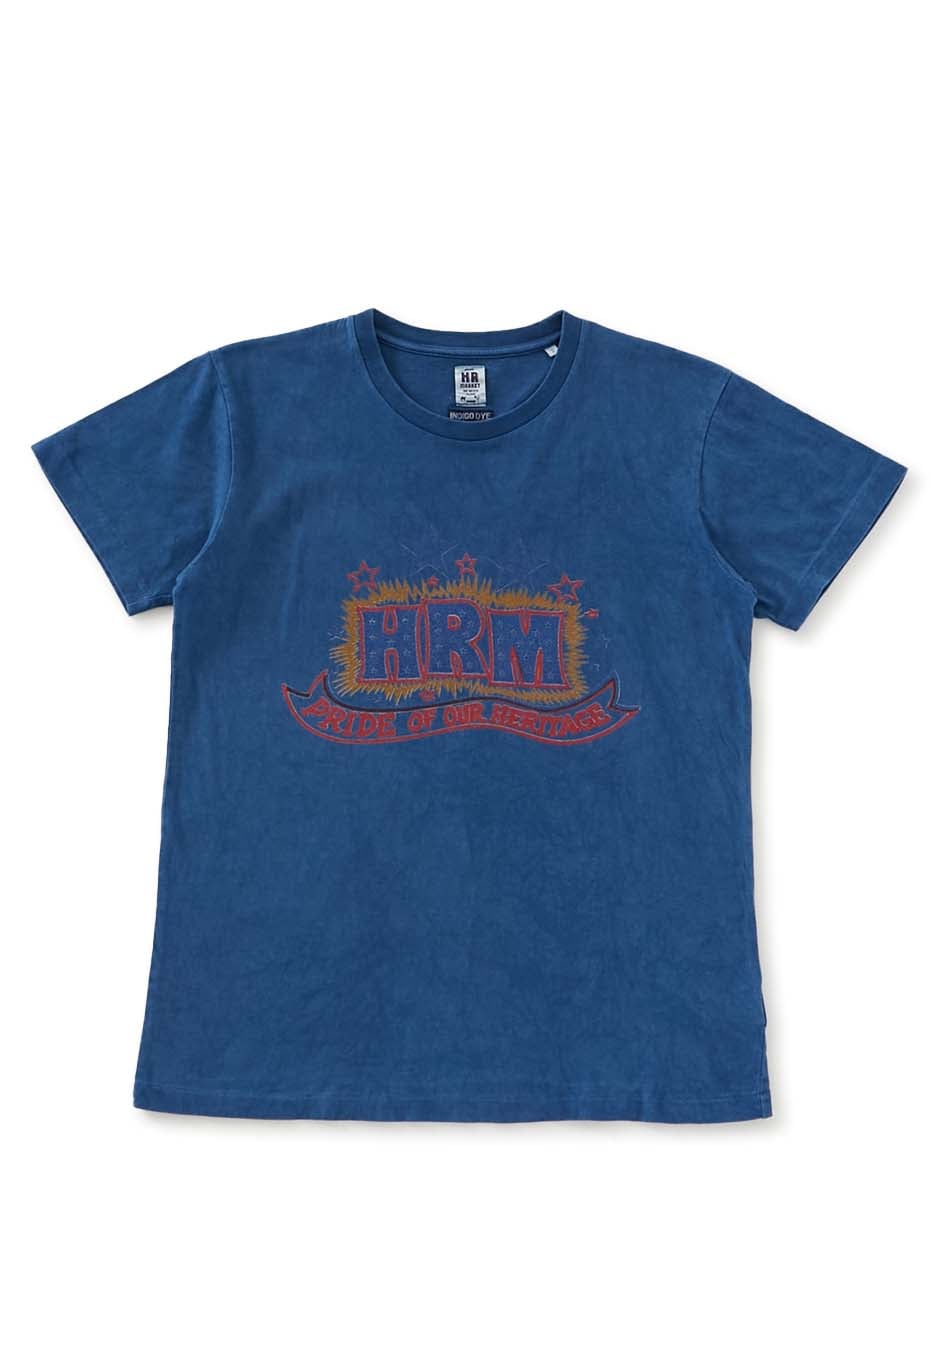 HRM 1972 PRIDE OF OUR HERITAGE インディゴダイ Tシャツ(XS BRT